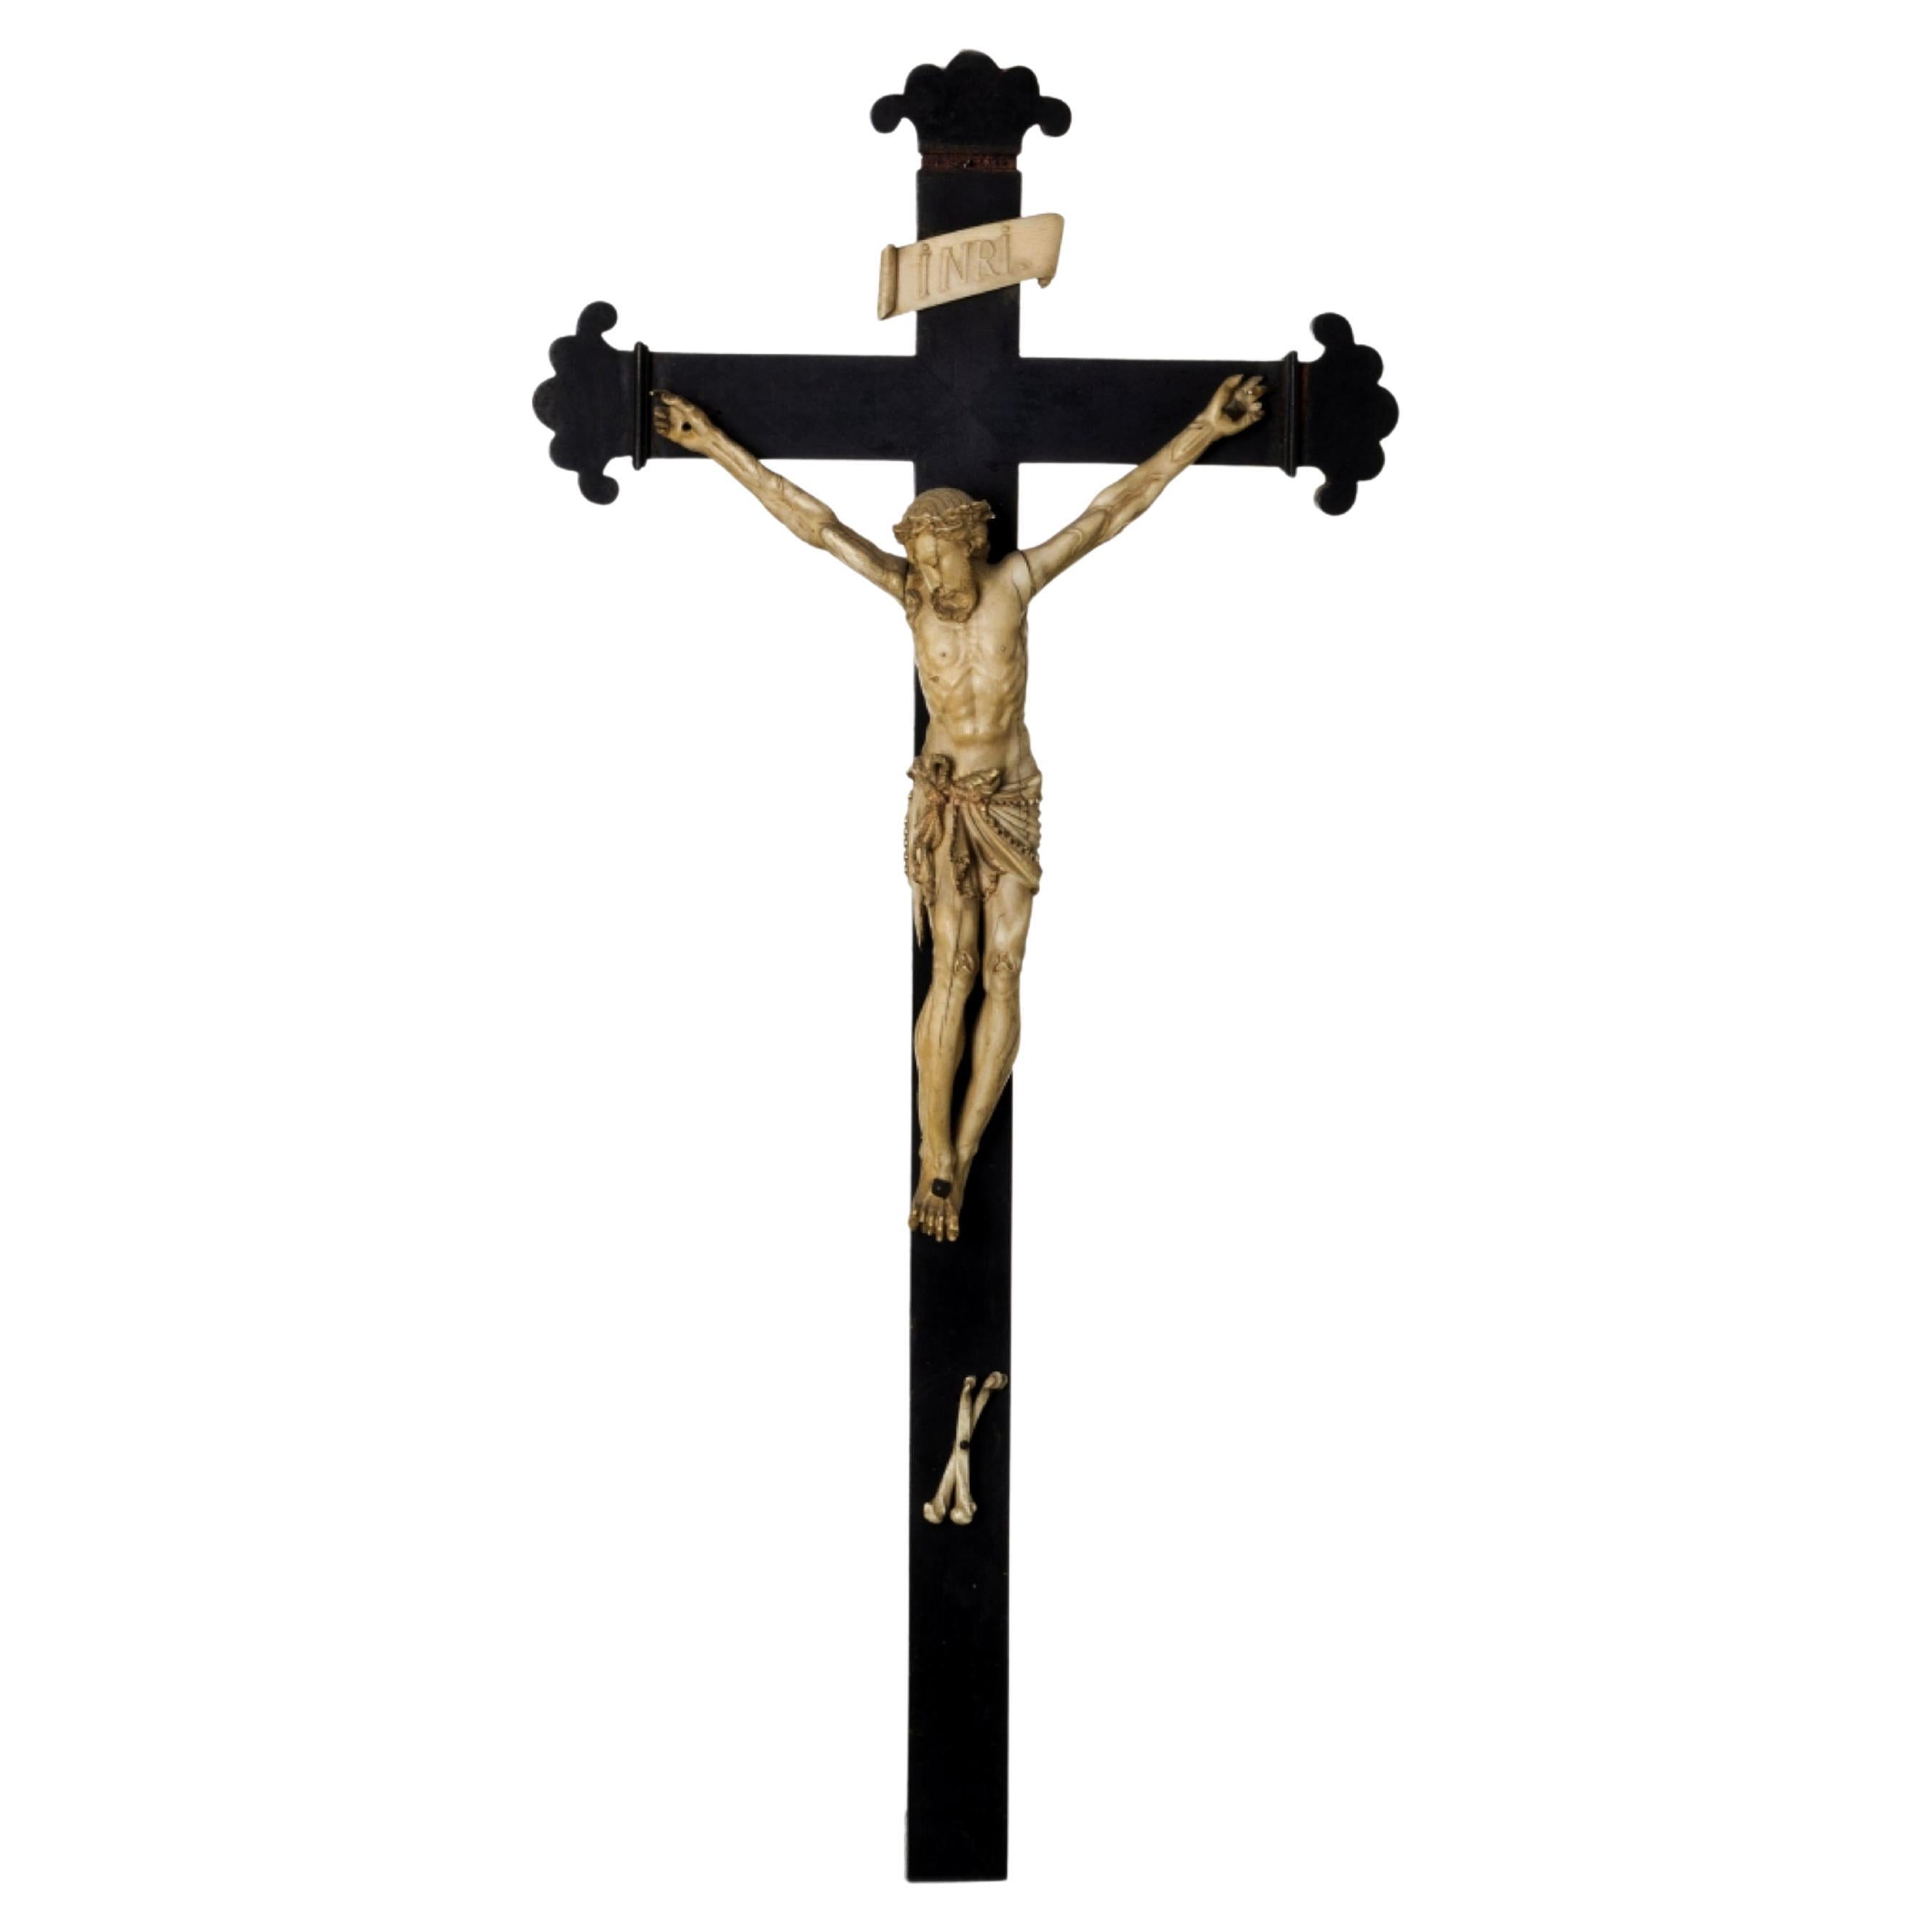 JESUS CHRIST CRUCIFIED  Indo-Portuguese sculpture from the 17th Century